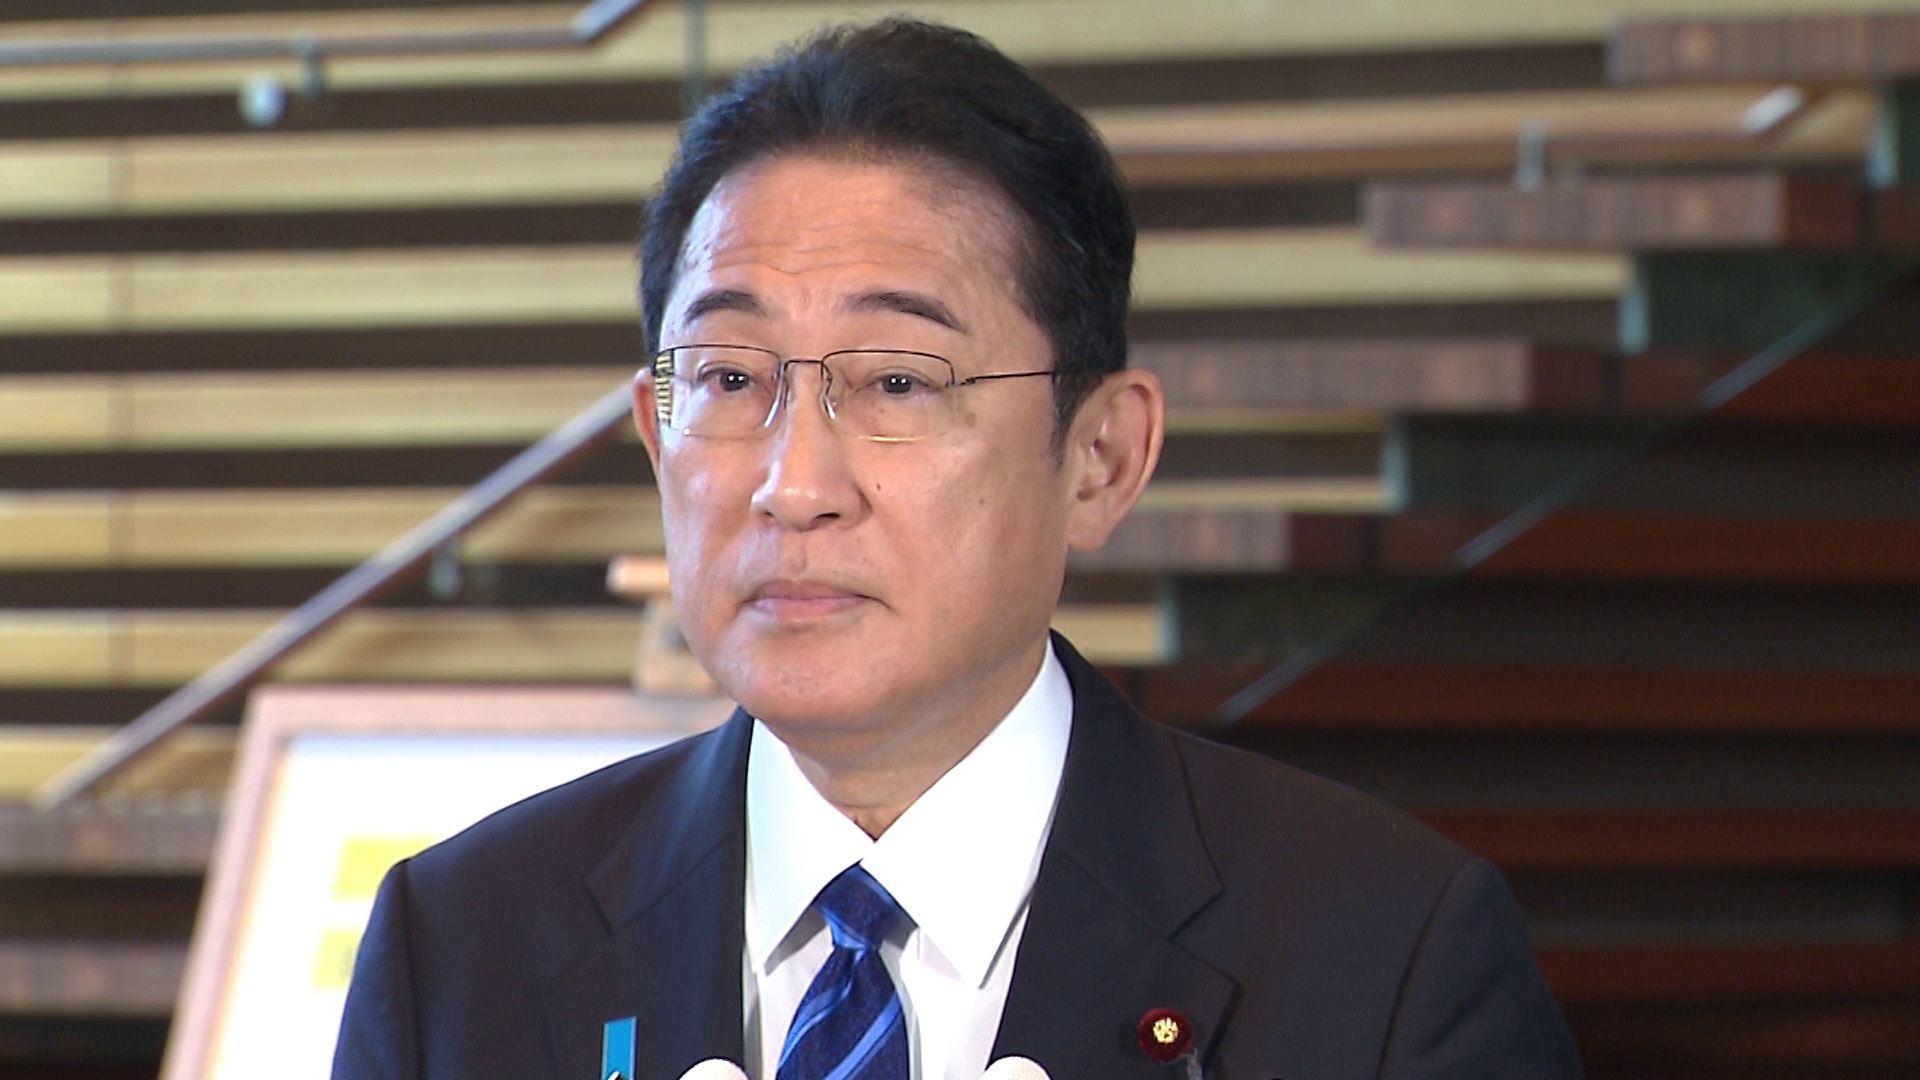 Press Conference by Prime Minister Kishida Regarding His Visit to the United States and Other Matters